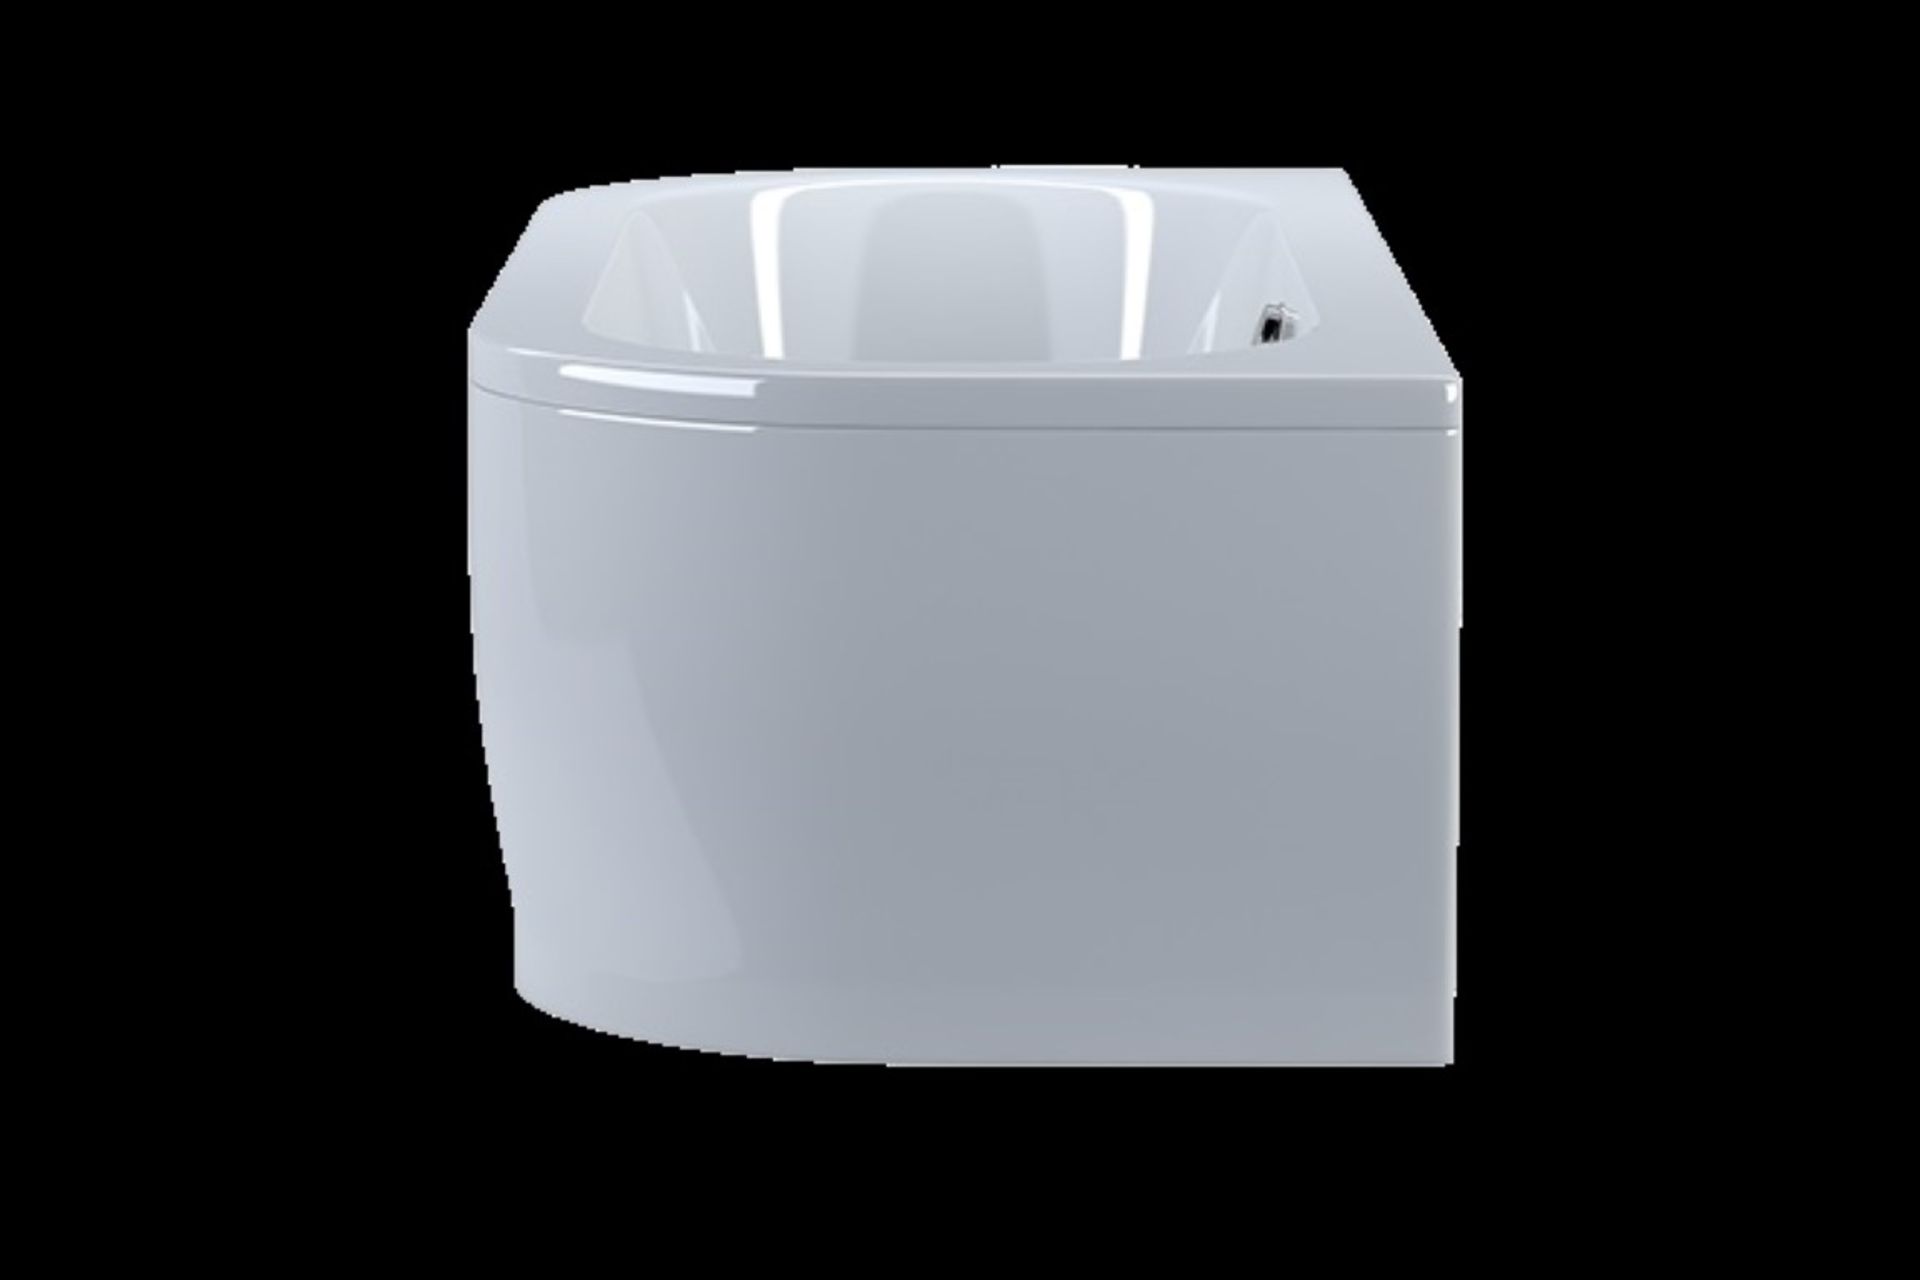 1 x "Palladio" BACK TO WALL BATH - Stylish Curvaceous Design - White Acrylic - 1700 X 750MM - - Image 9 of 9